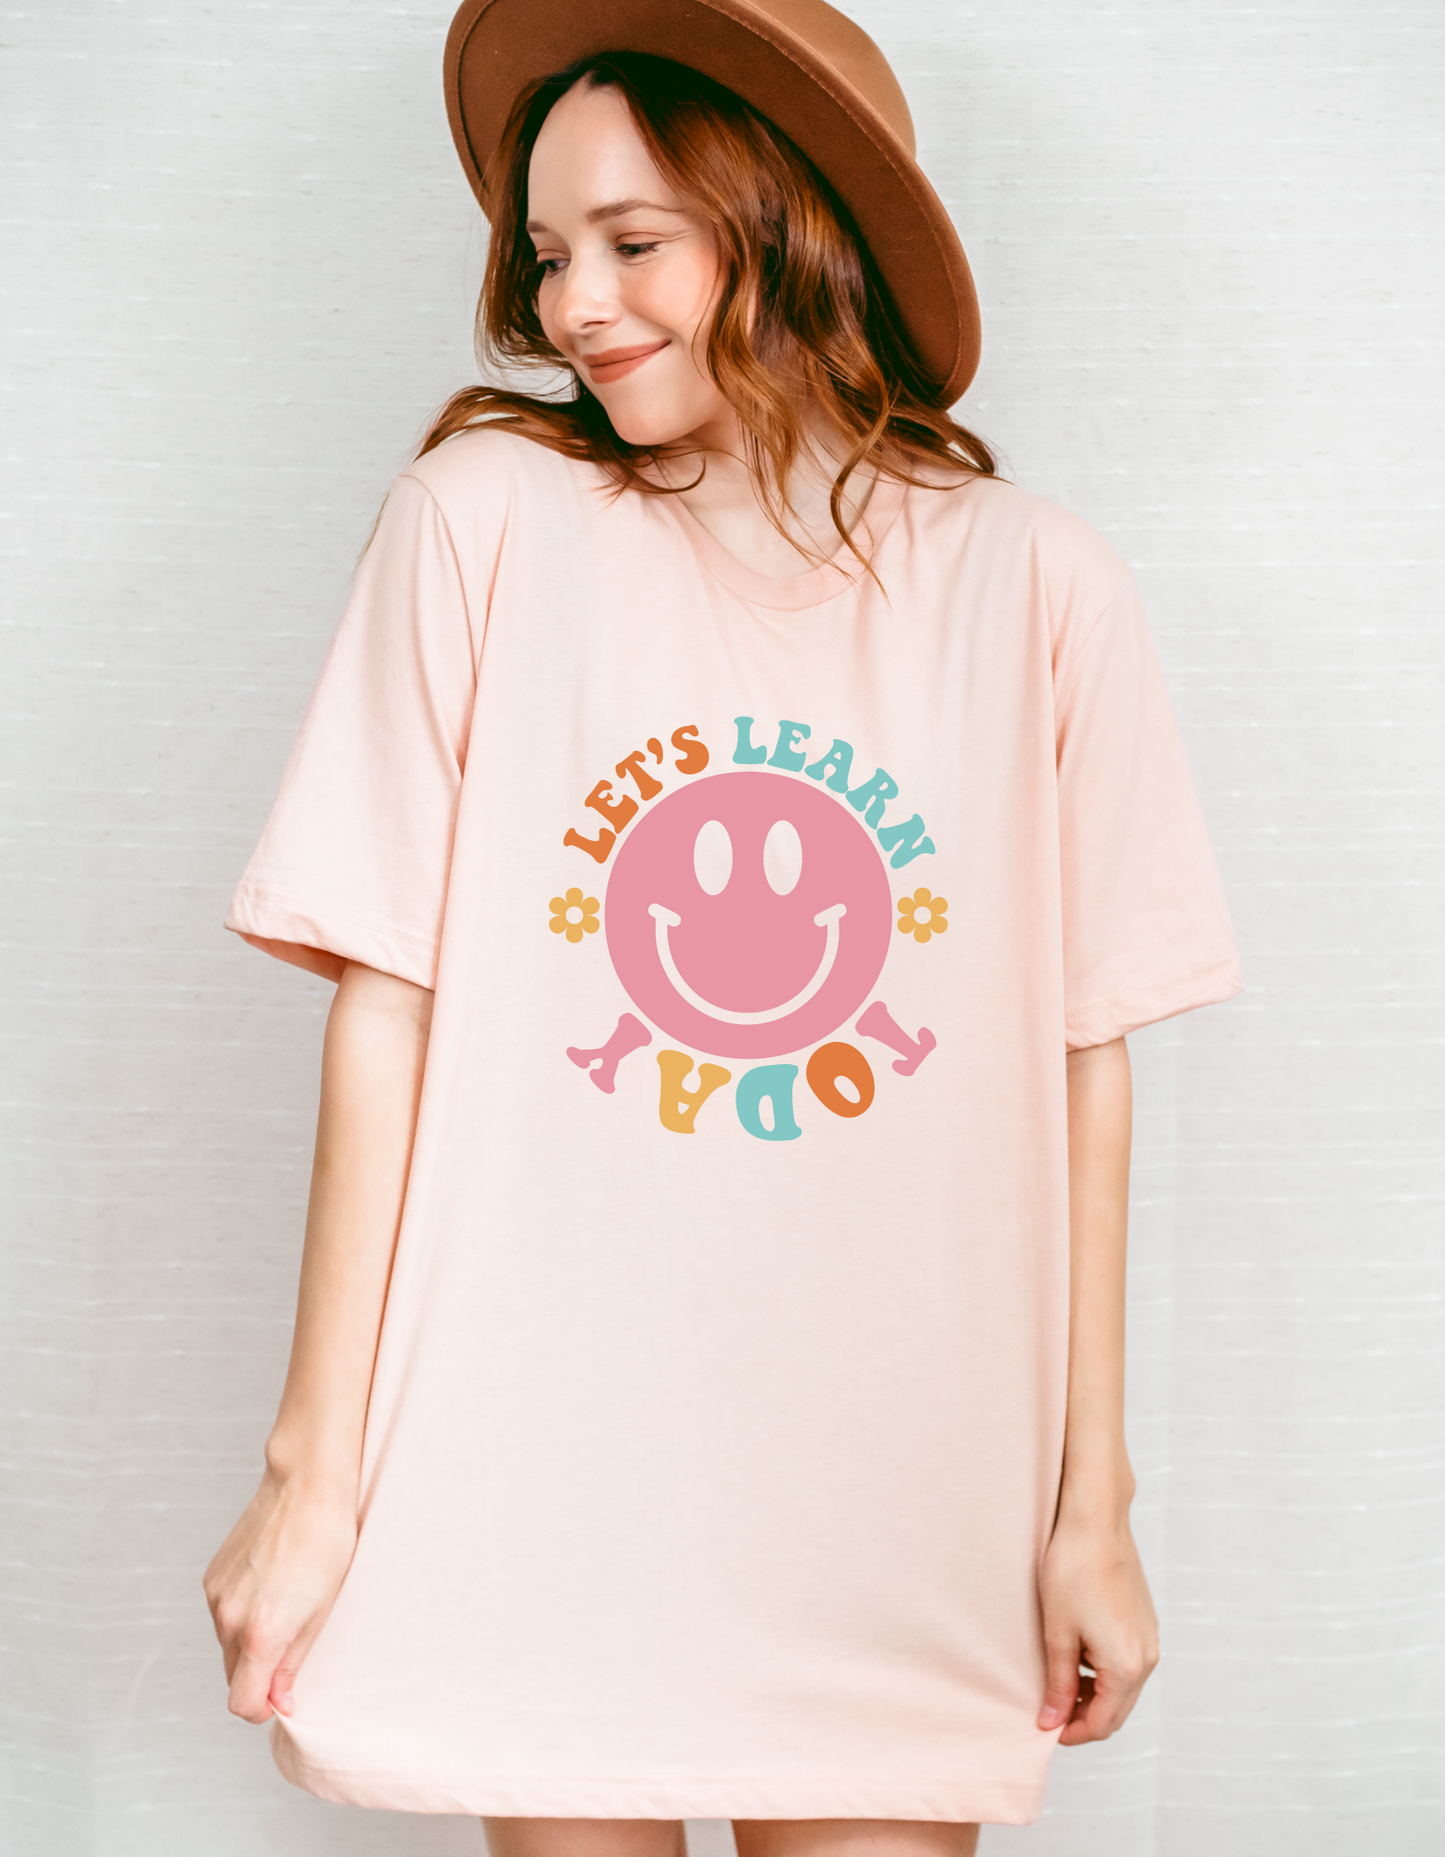 Let's learn today - Light pink t- shirt